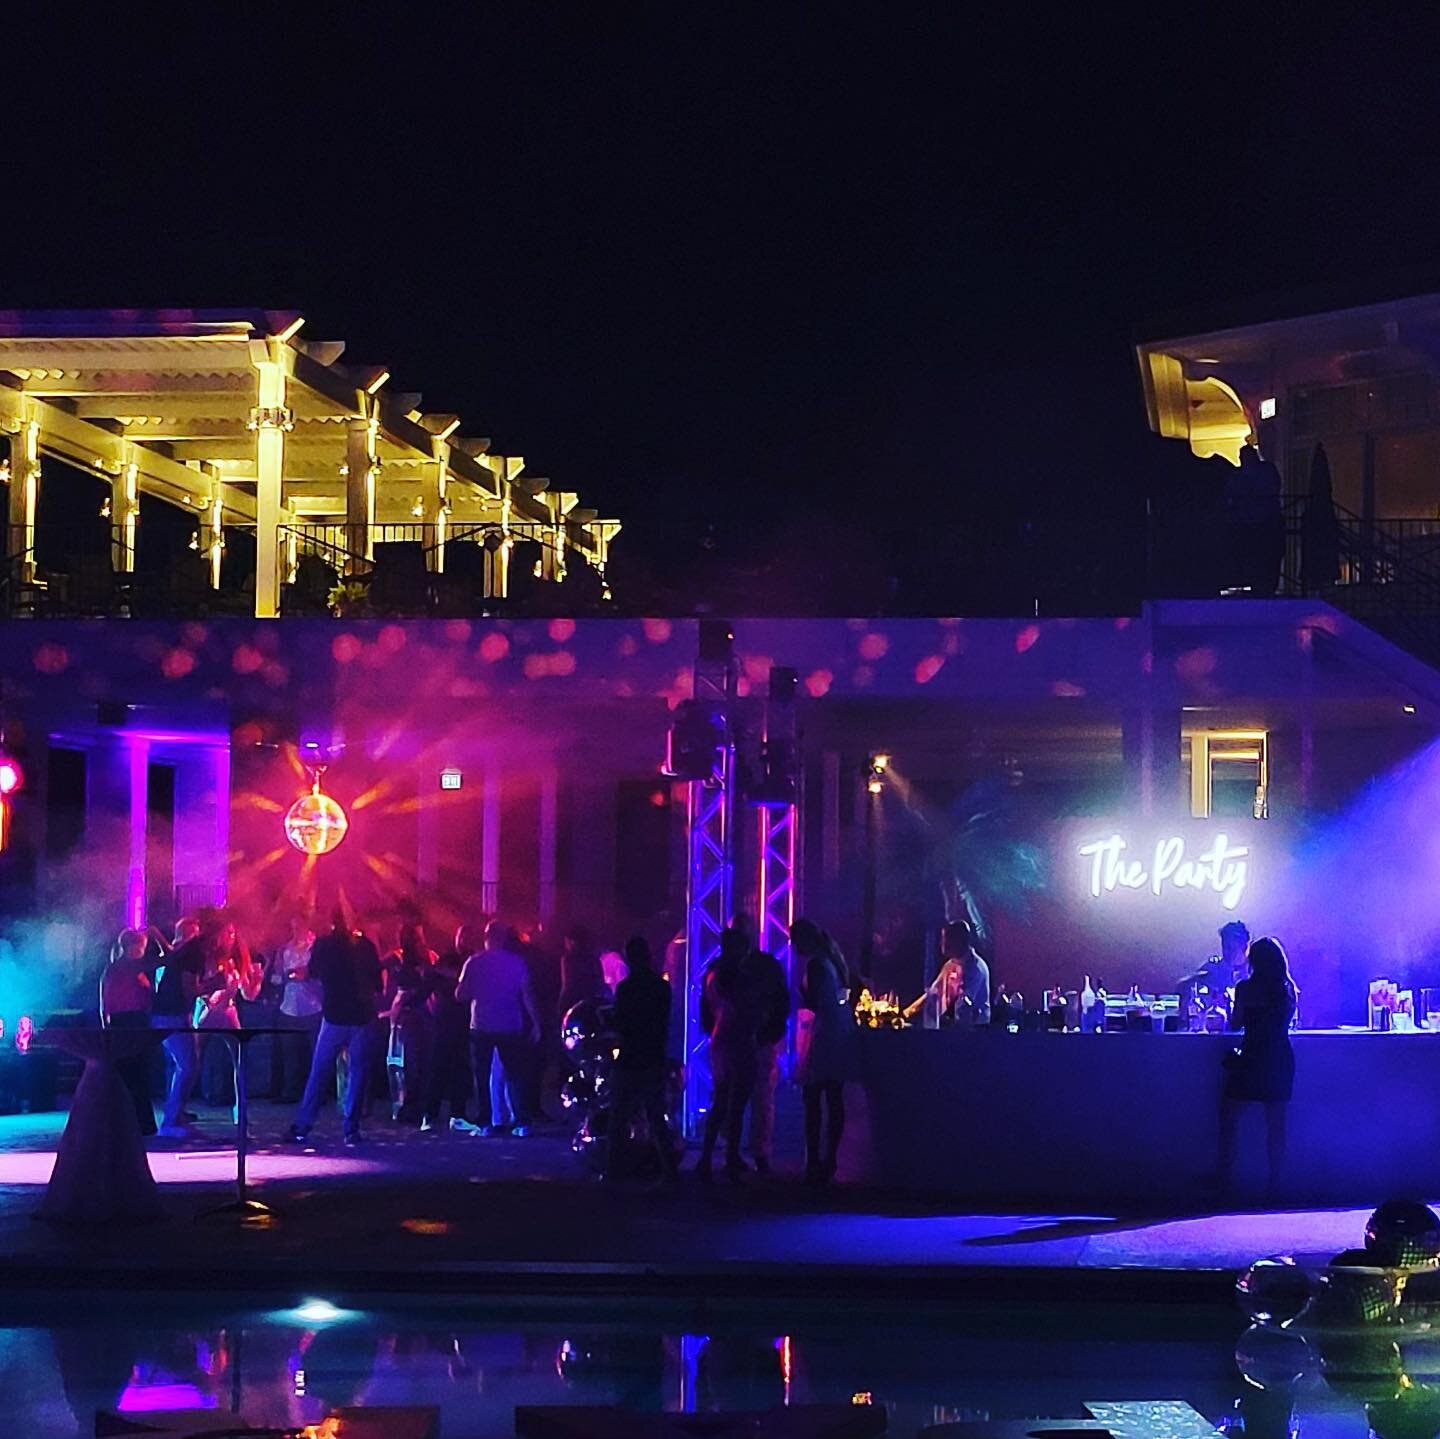 Repeat after me; lighting is everything!  For THE PARTY, we turned BMCC into Bryn Mawr Night Club taking over the pool deck for alllll the fun. 

#nightclub #countryclub #eventplanner #luxuryeventplanner #luxuryevents #pooldeck #partyvibe #rawbar #di